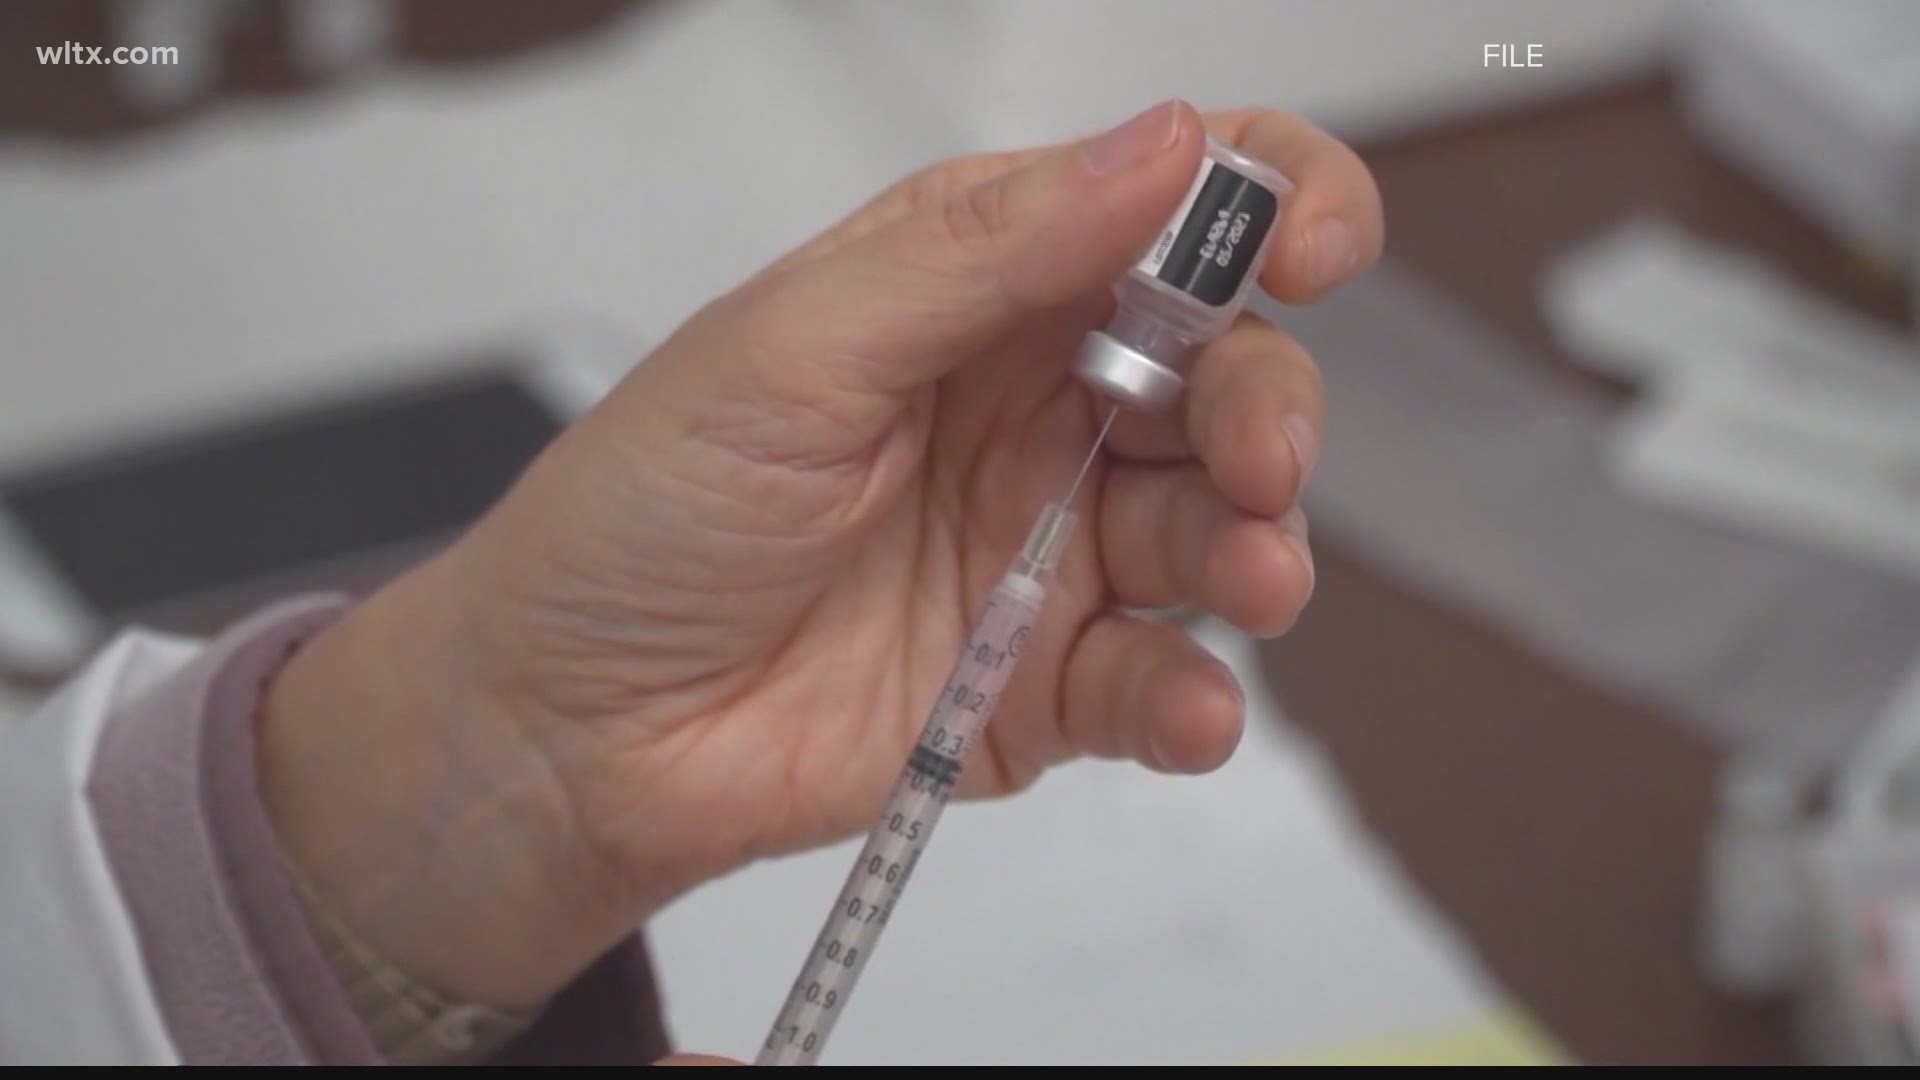 DHEC launched up to 25 grants totaling $5M for six months to increase vaccines for residents.